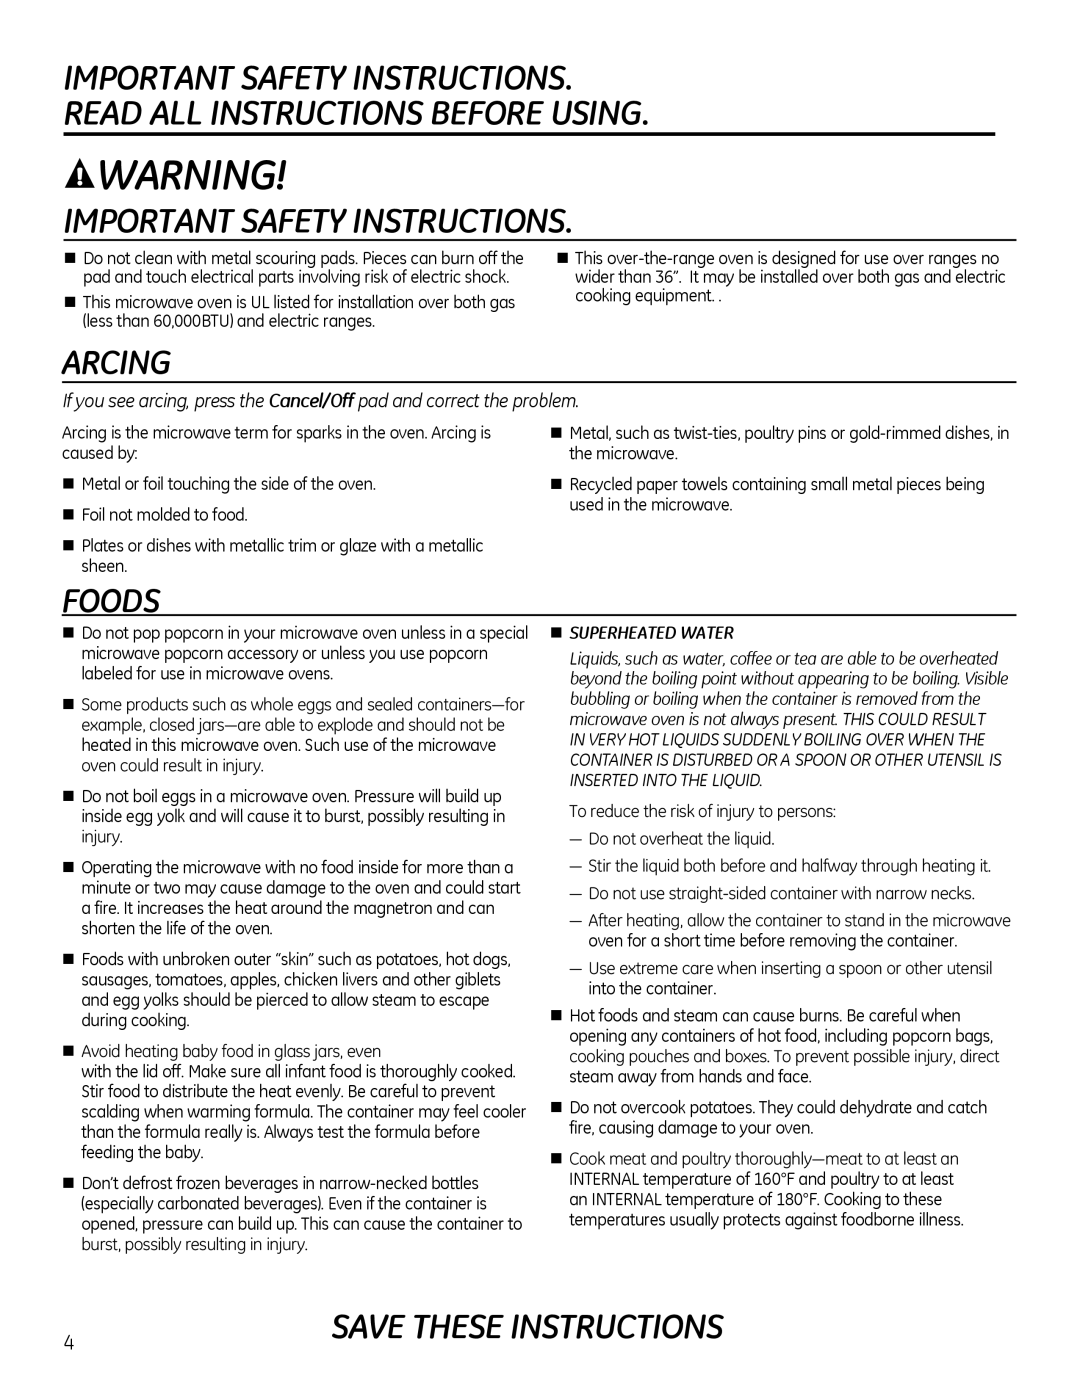 GE Microwave Oven owner manual Arcing, Foods, Important Safety Instructions, Save These Instructions, „Superheated Water 